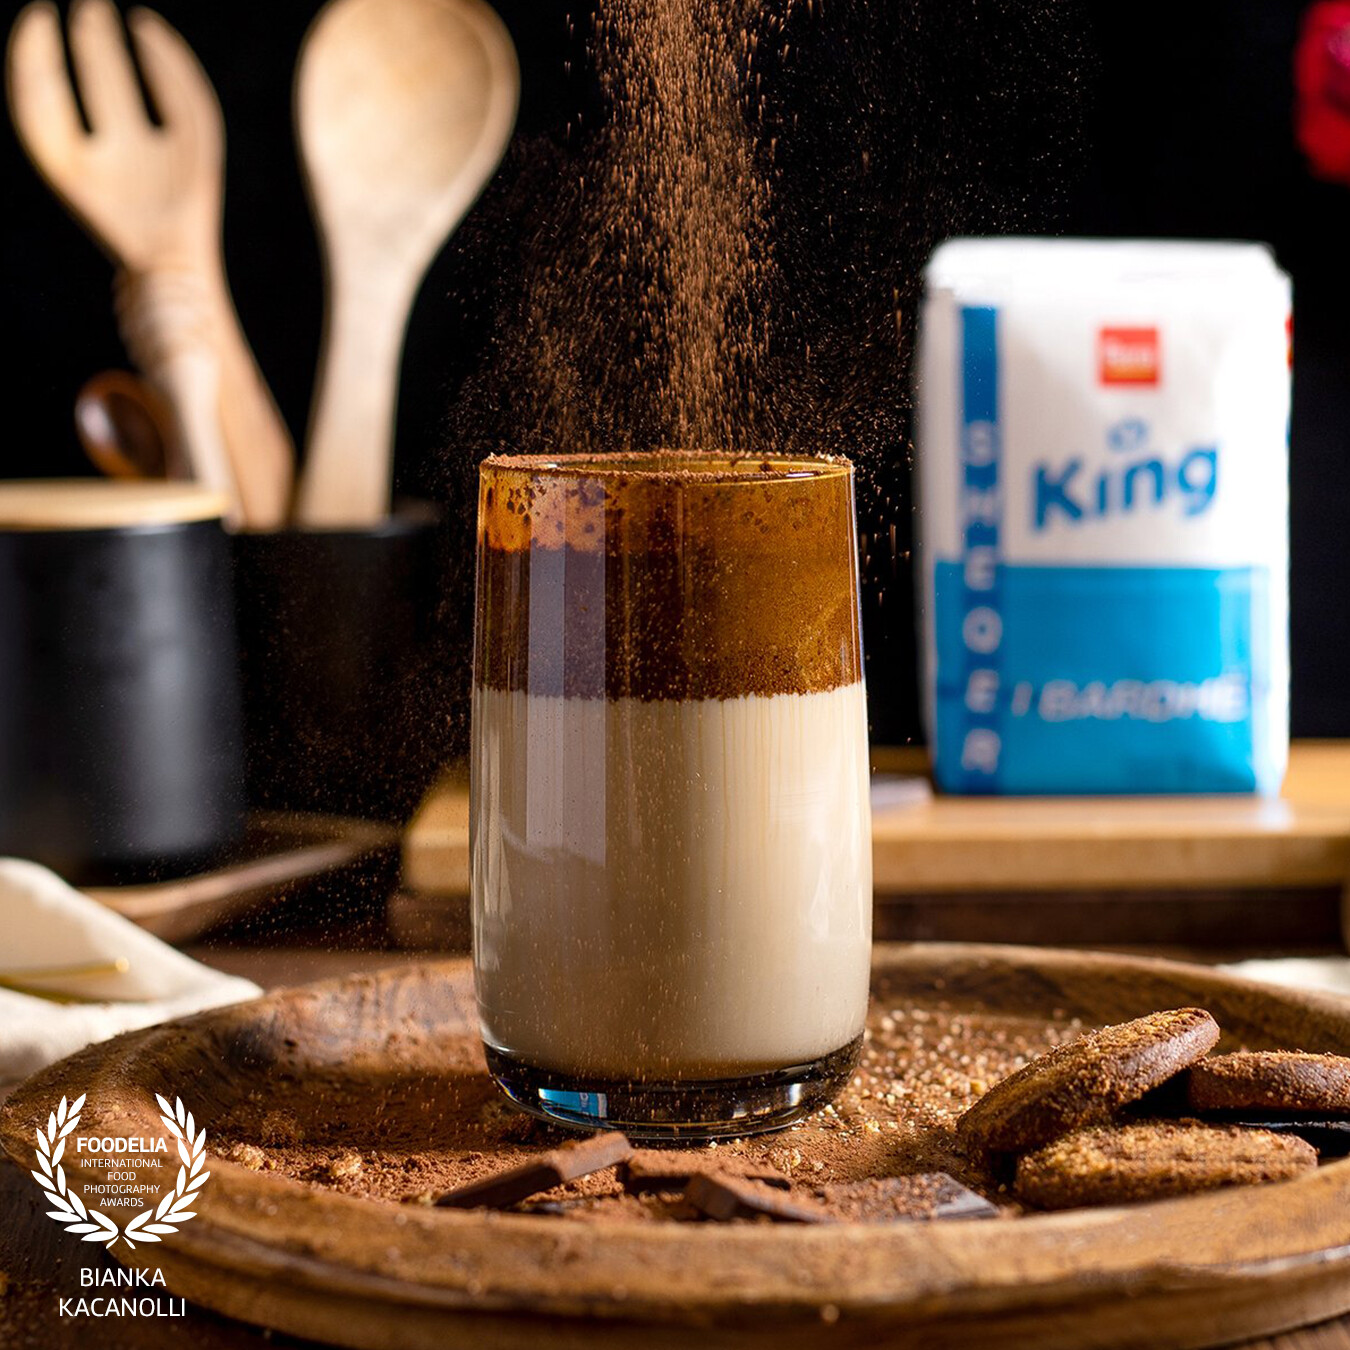 Coffee with chocolate and cocoa powder on top. The concept of the photo is based on one of the ingredients such as sugar, placed in the background, which is used for sweetening but not as the main focus. This is a photo taken in the DC Media Group studio for one of the most famous sugar companies in Albania, Ferra & Co.